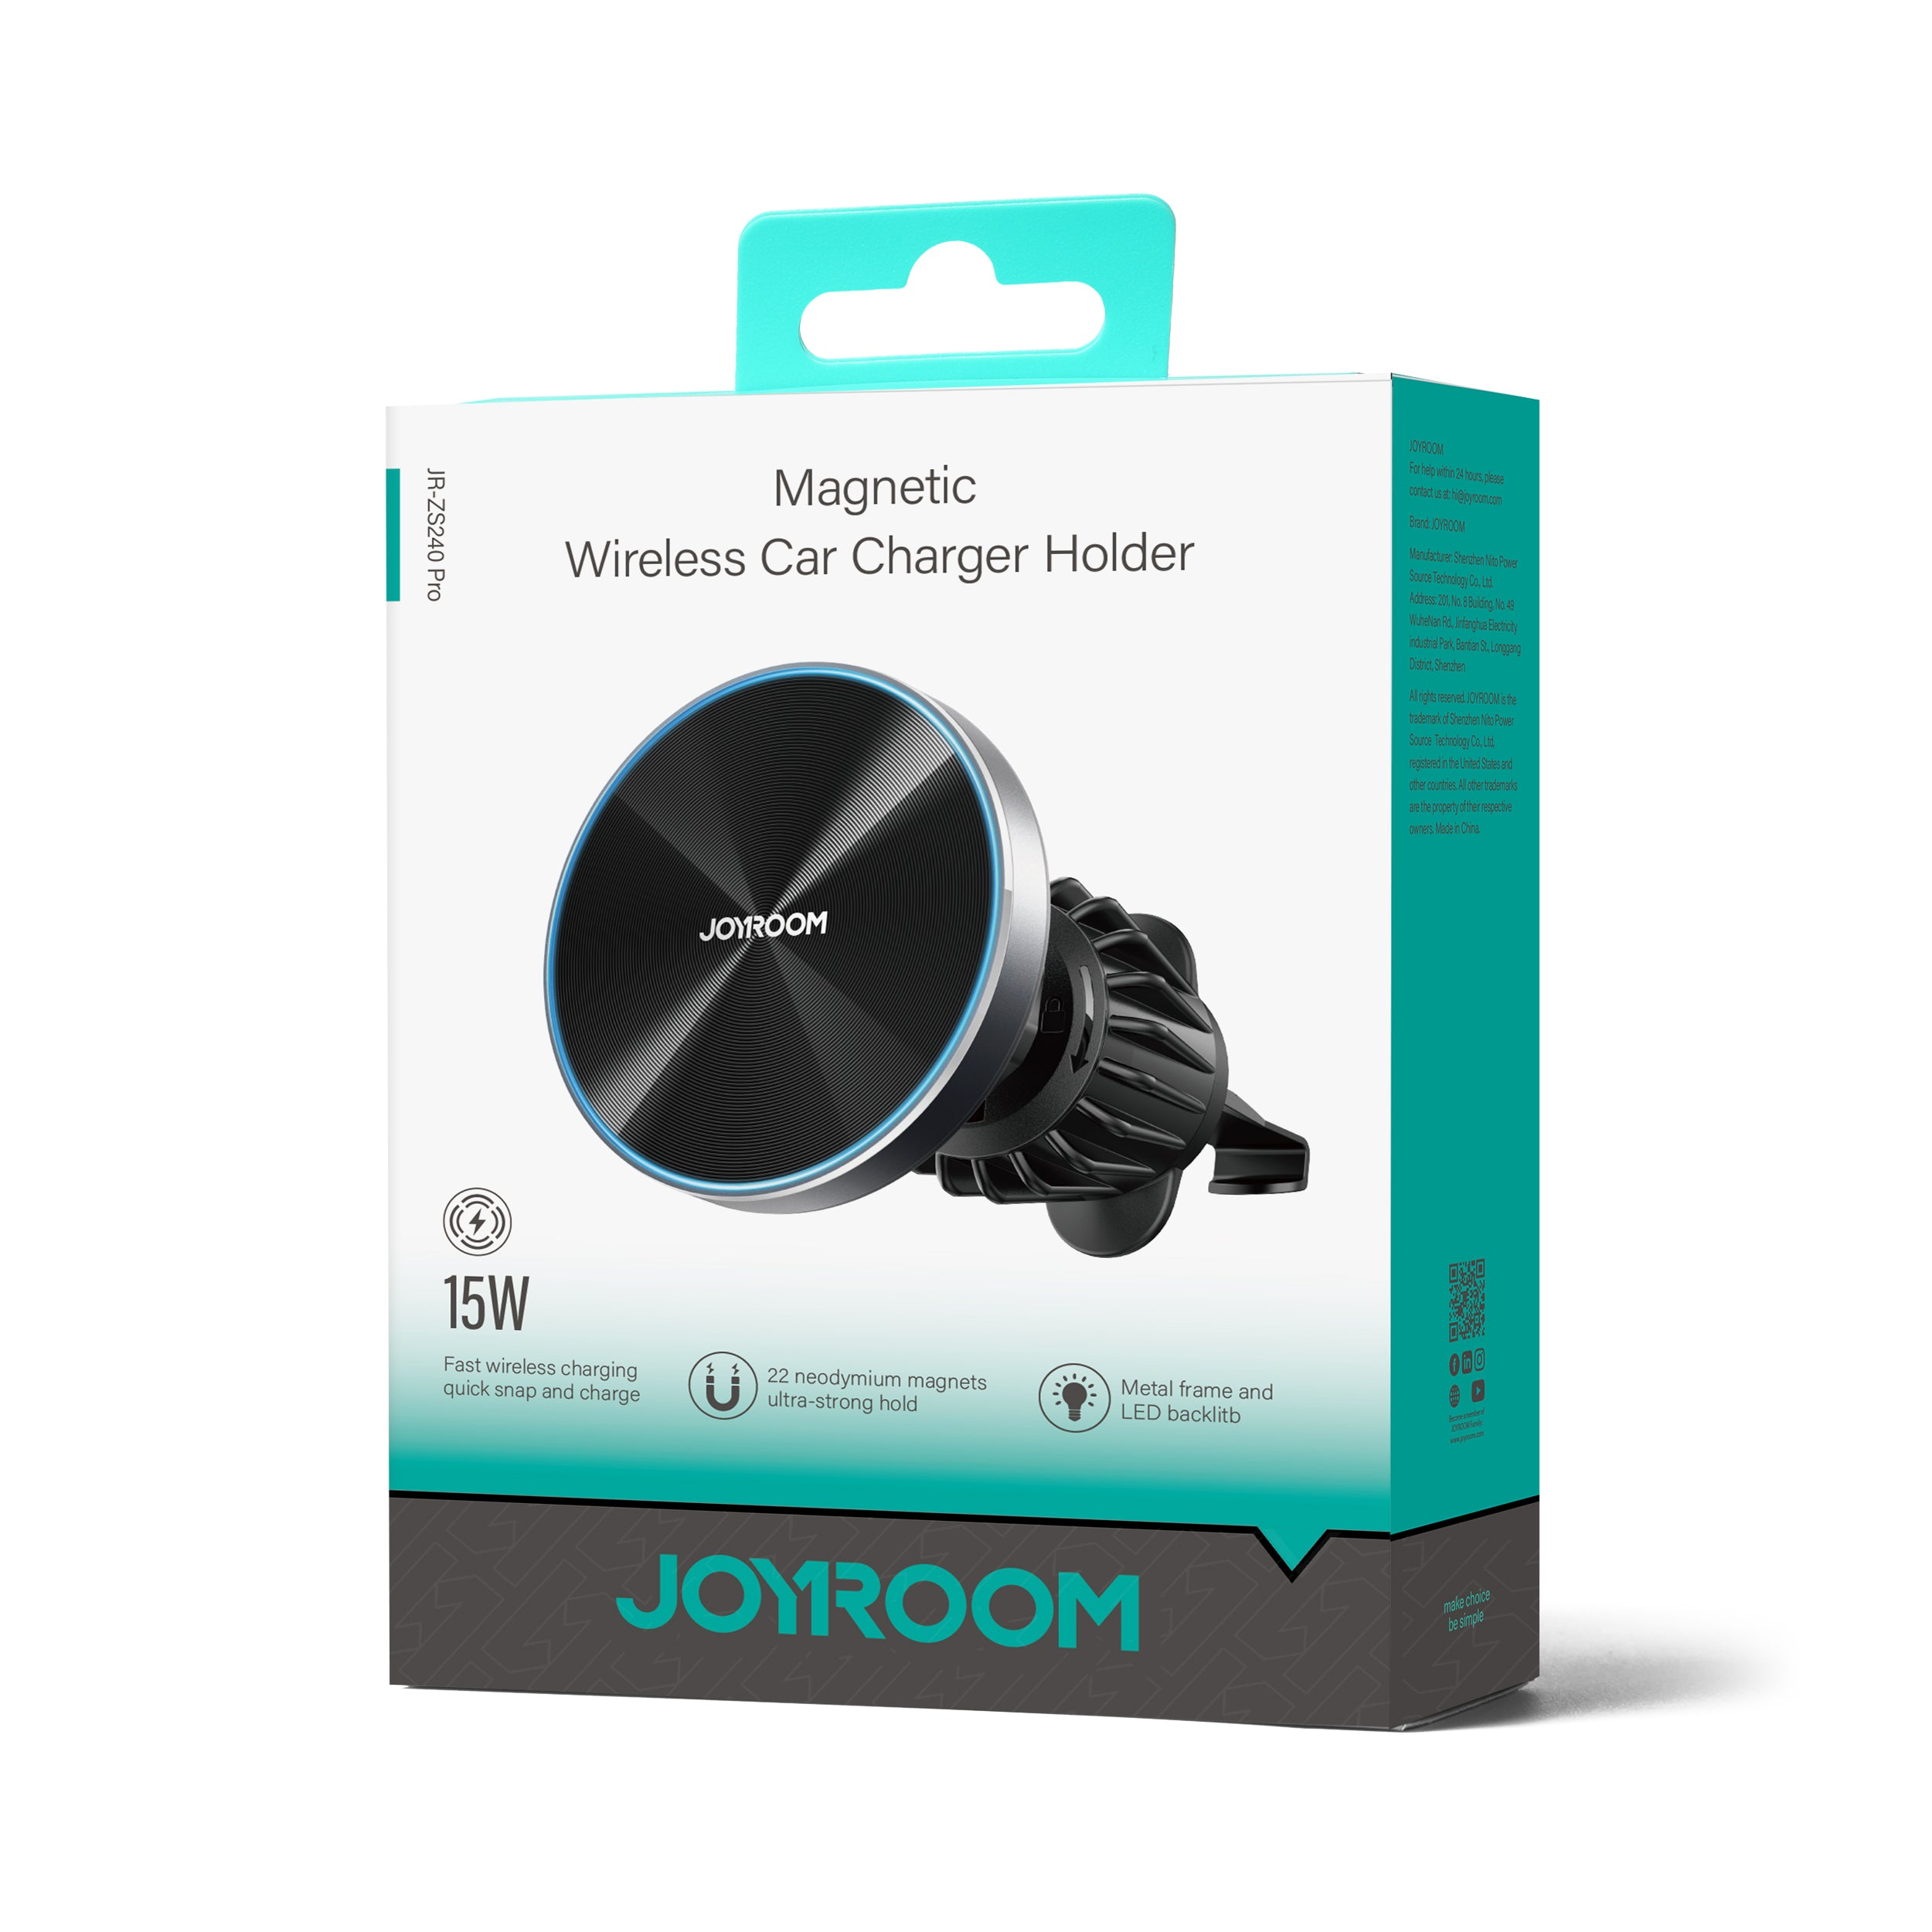 JOYROOM JR-ZS240 Pro 15W Fast wireless magnetic wireless car charger fits on most air vent blades